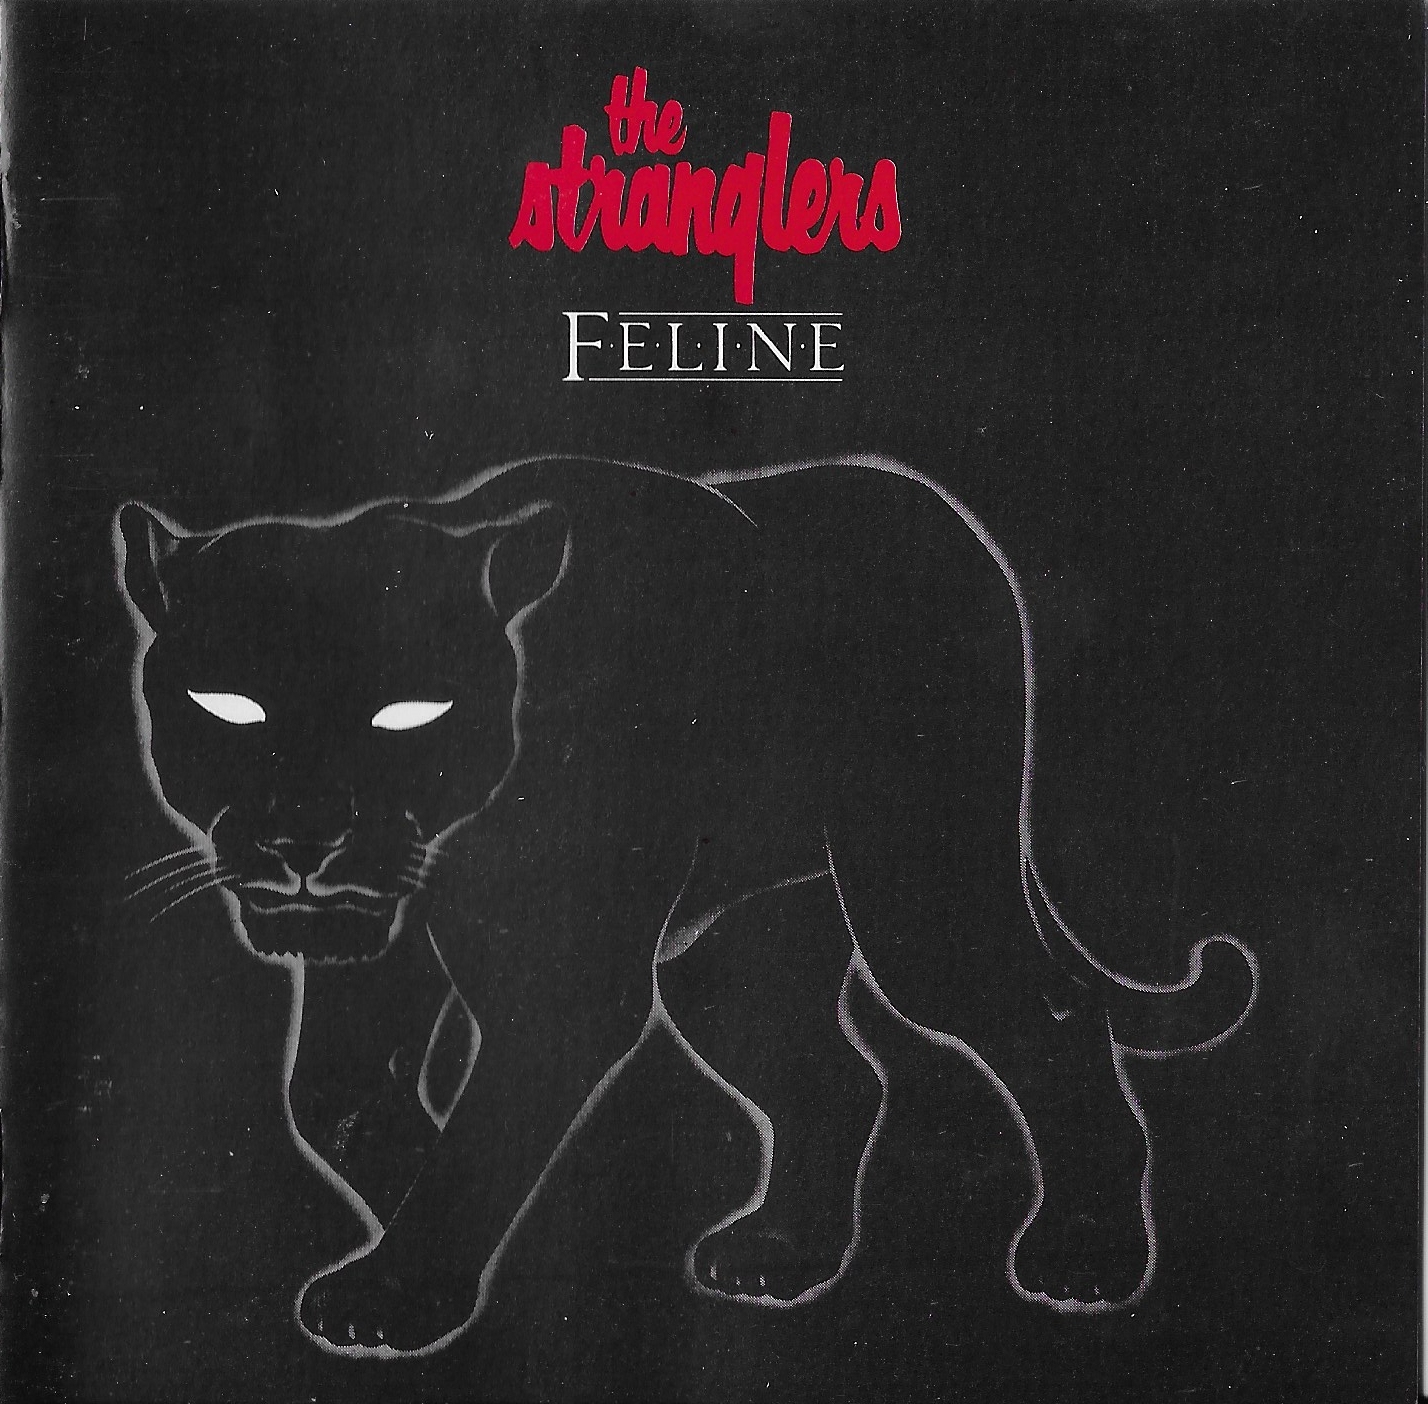 Picture of CDEPC 25237 Feline by artist The Stranglers from The Stranglers cds